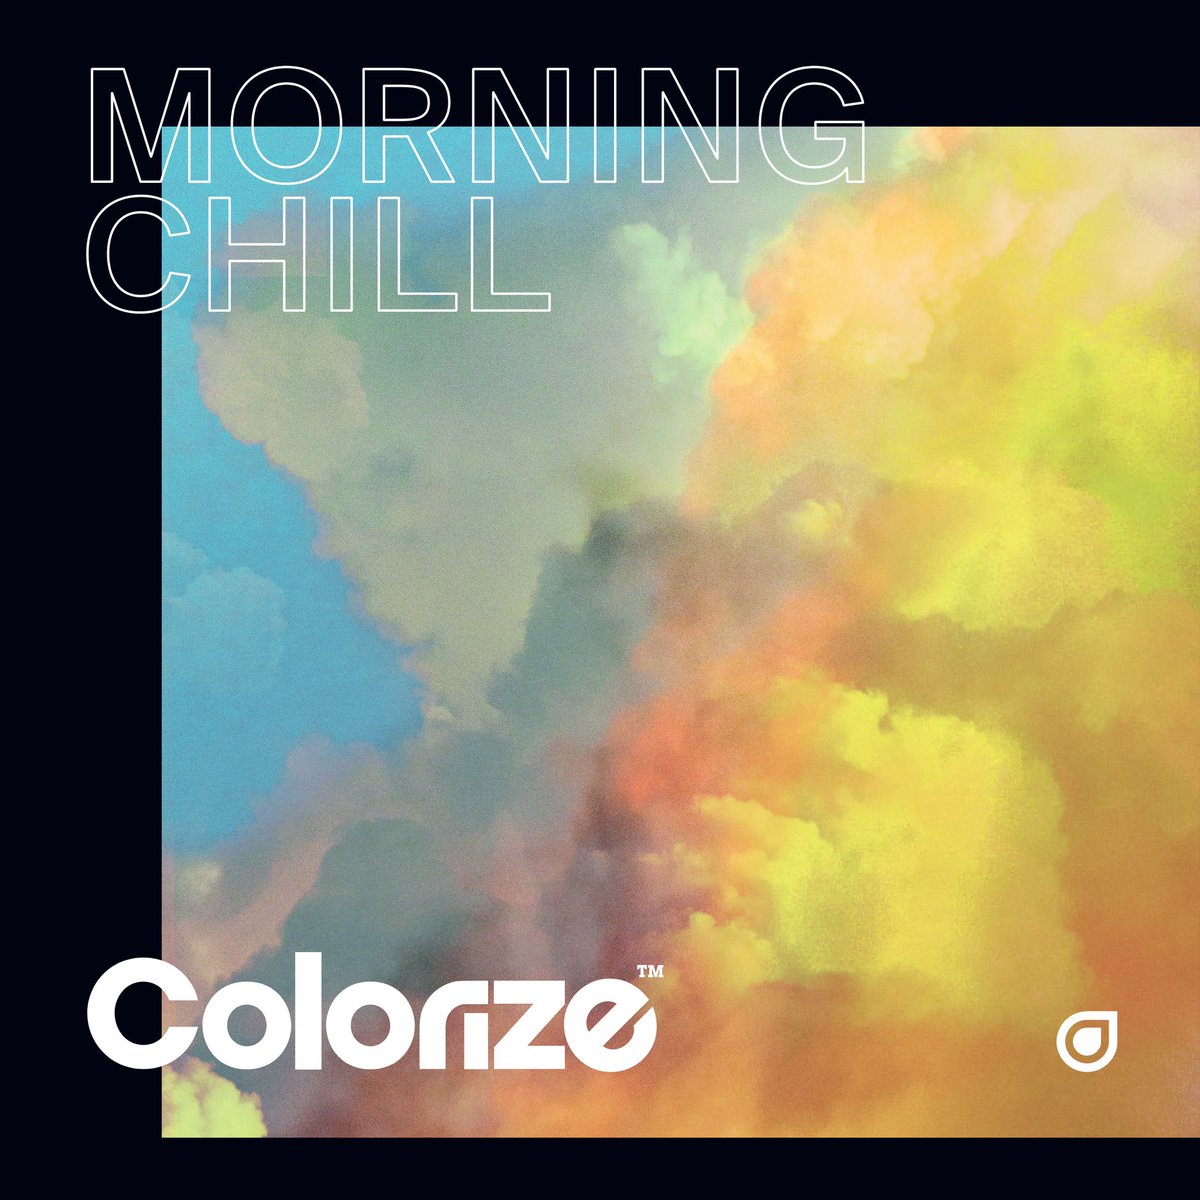 Gently ease yourself into a new day with our ‘Morning Chill mix Volume. 1’ 🌅😌 It’s full of chilled-out Deep, Melodic and Progressive house tracks from the Colorize catalogue including @klur_music, @LiplessMusic, @djimboh, @robbyeast & more!🙏 Tune in youtu.be/8hB3ZAIyplk?si…